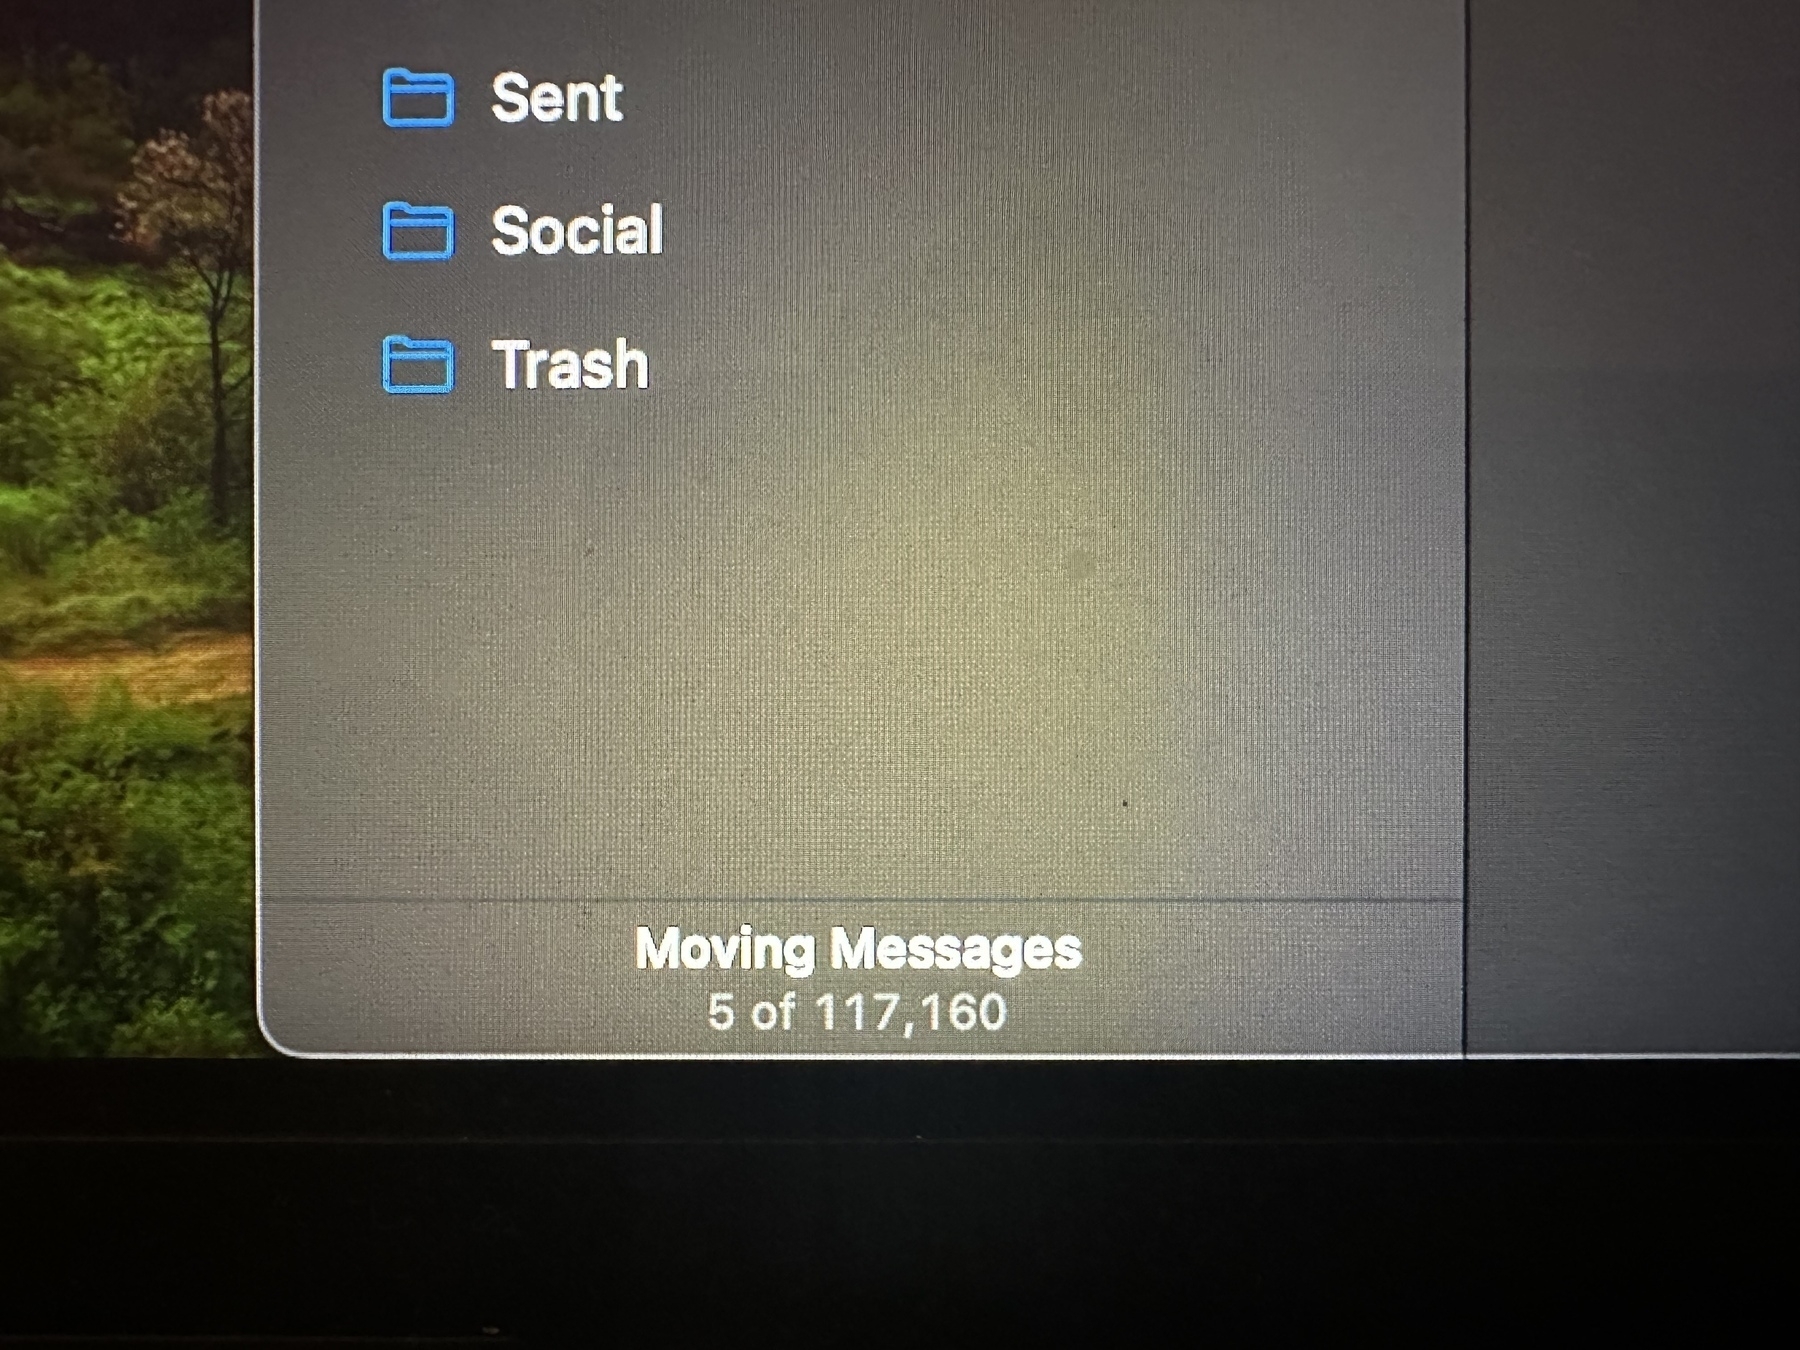 A screen displays an email application moving 5 out of 117,160 messages, with folders labeled Sent, Social, and Trash visible.